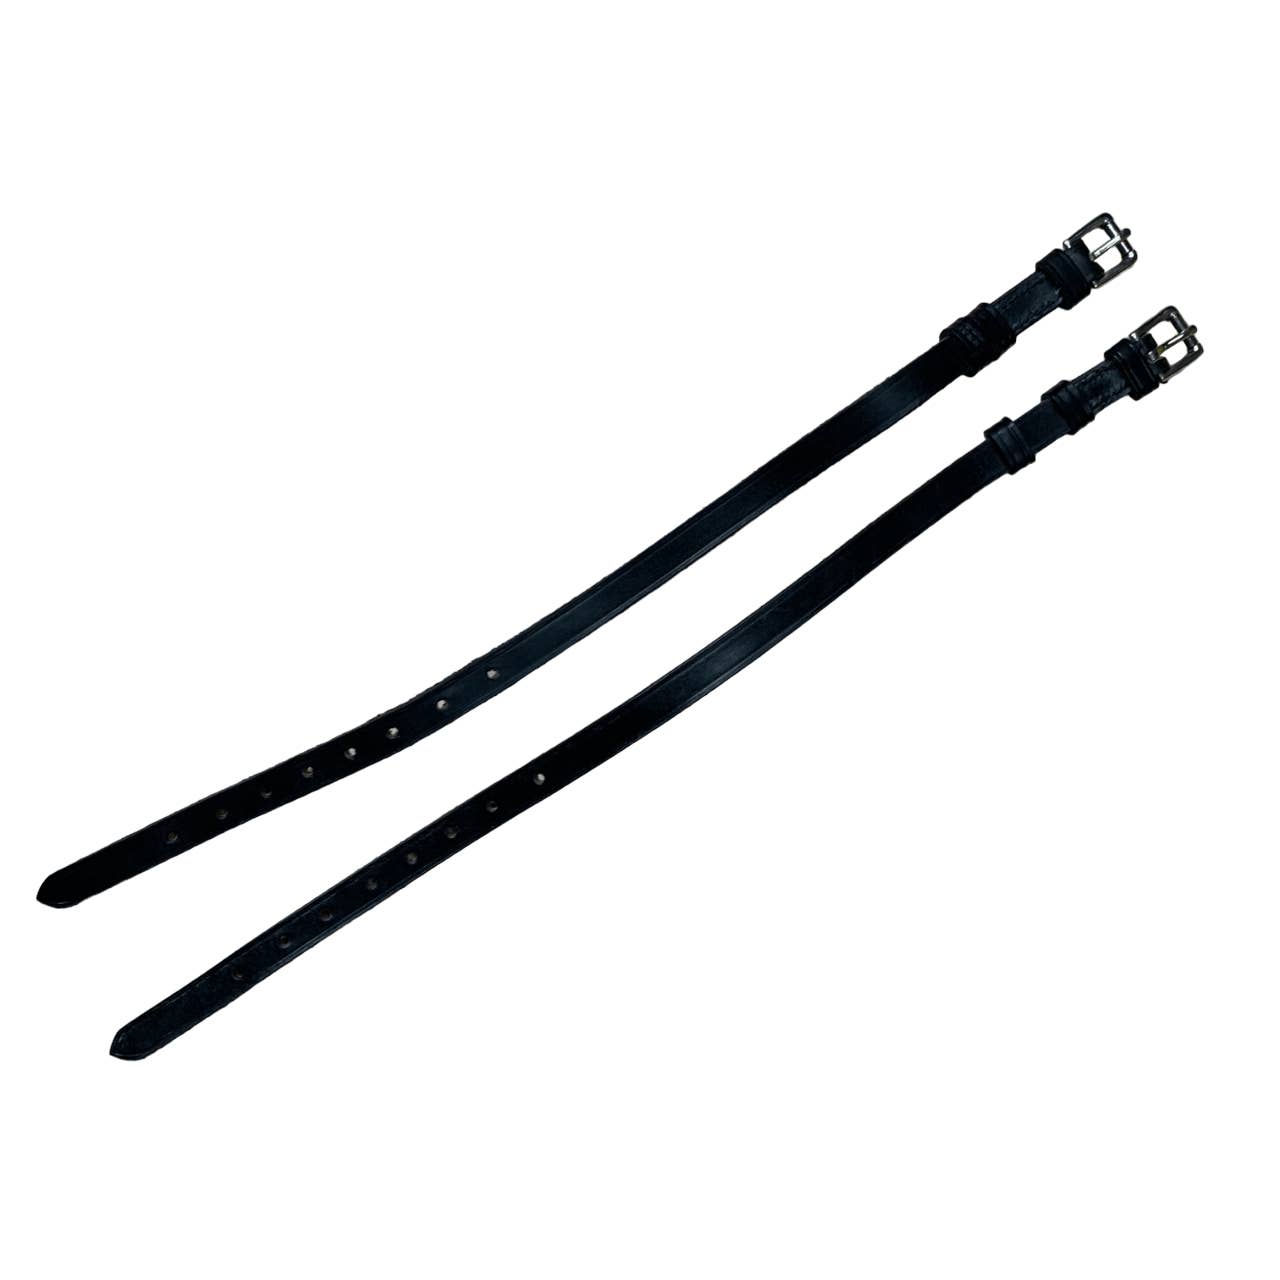 Leather Spur Straps in Black - 15"